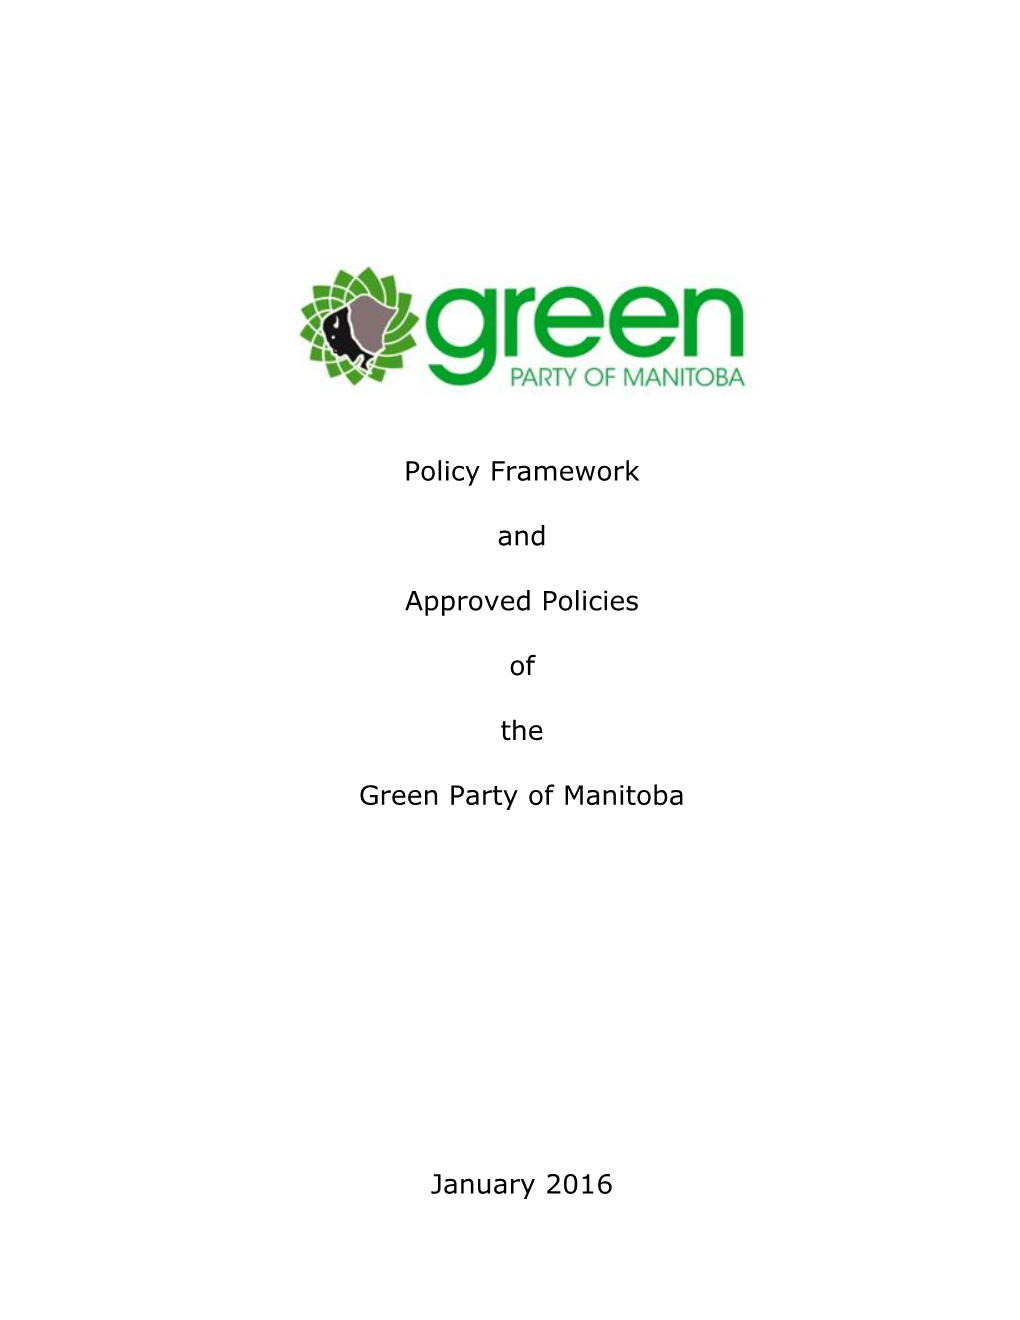 Policy Framework and Approved Policies of the Green Party of Manitoba January 2016